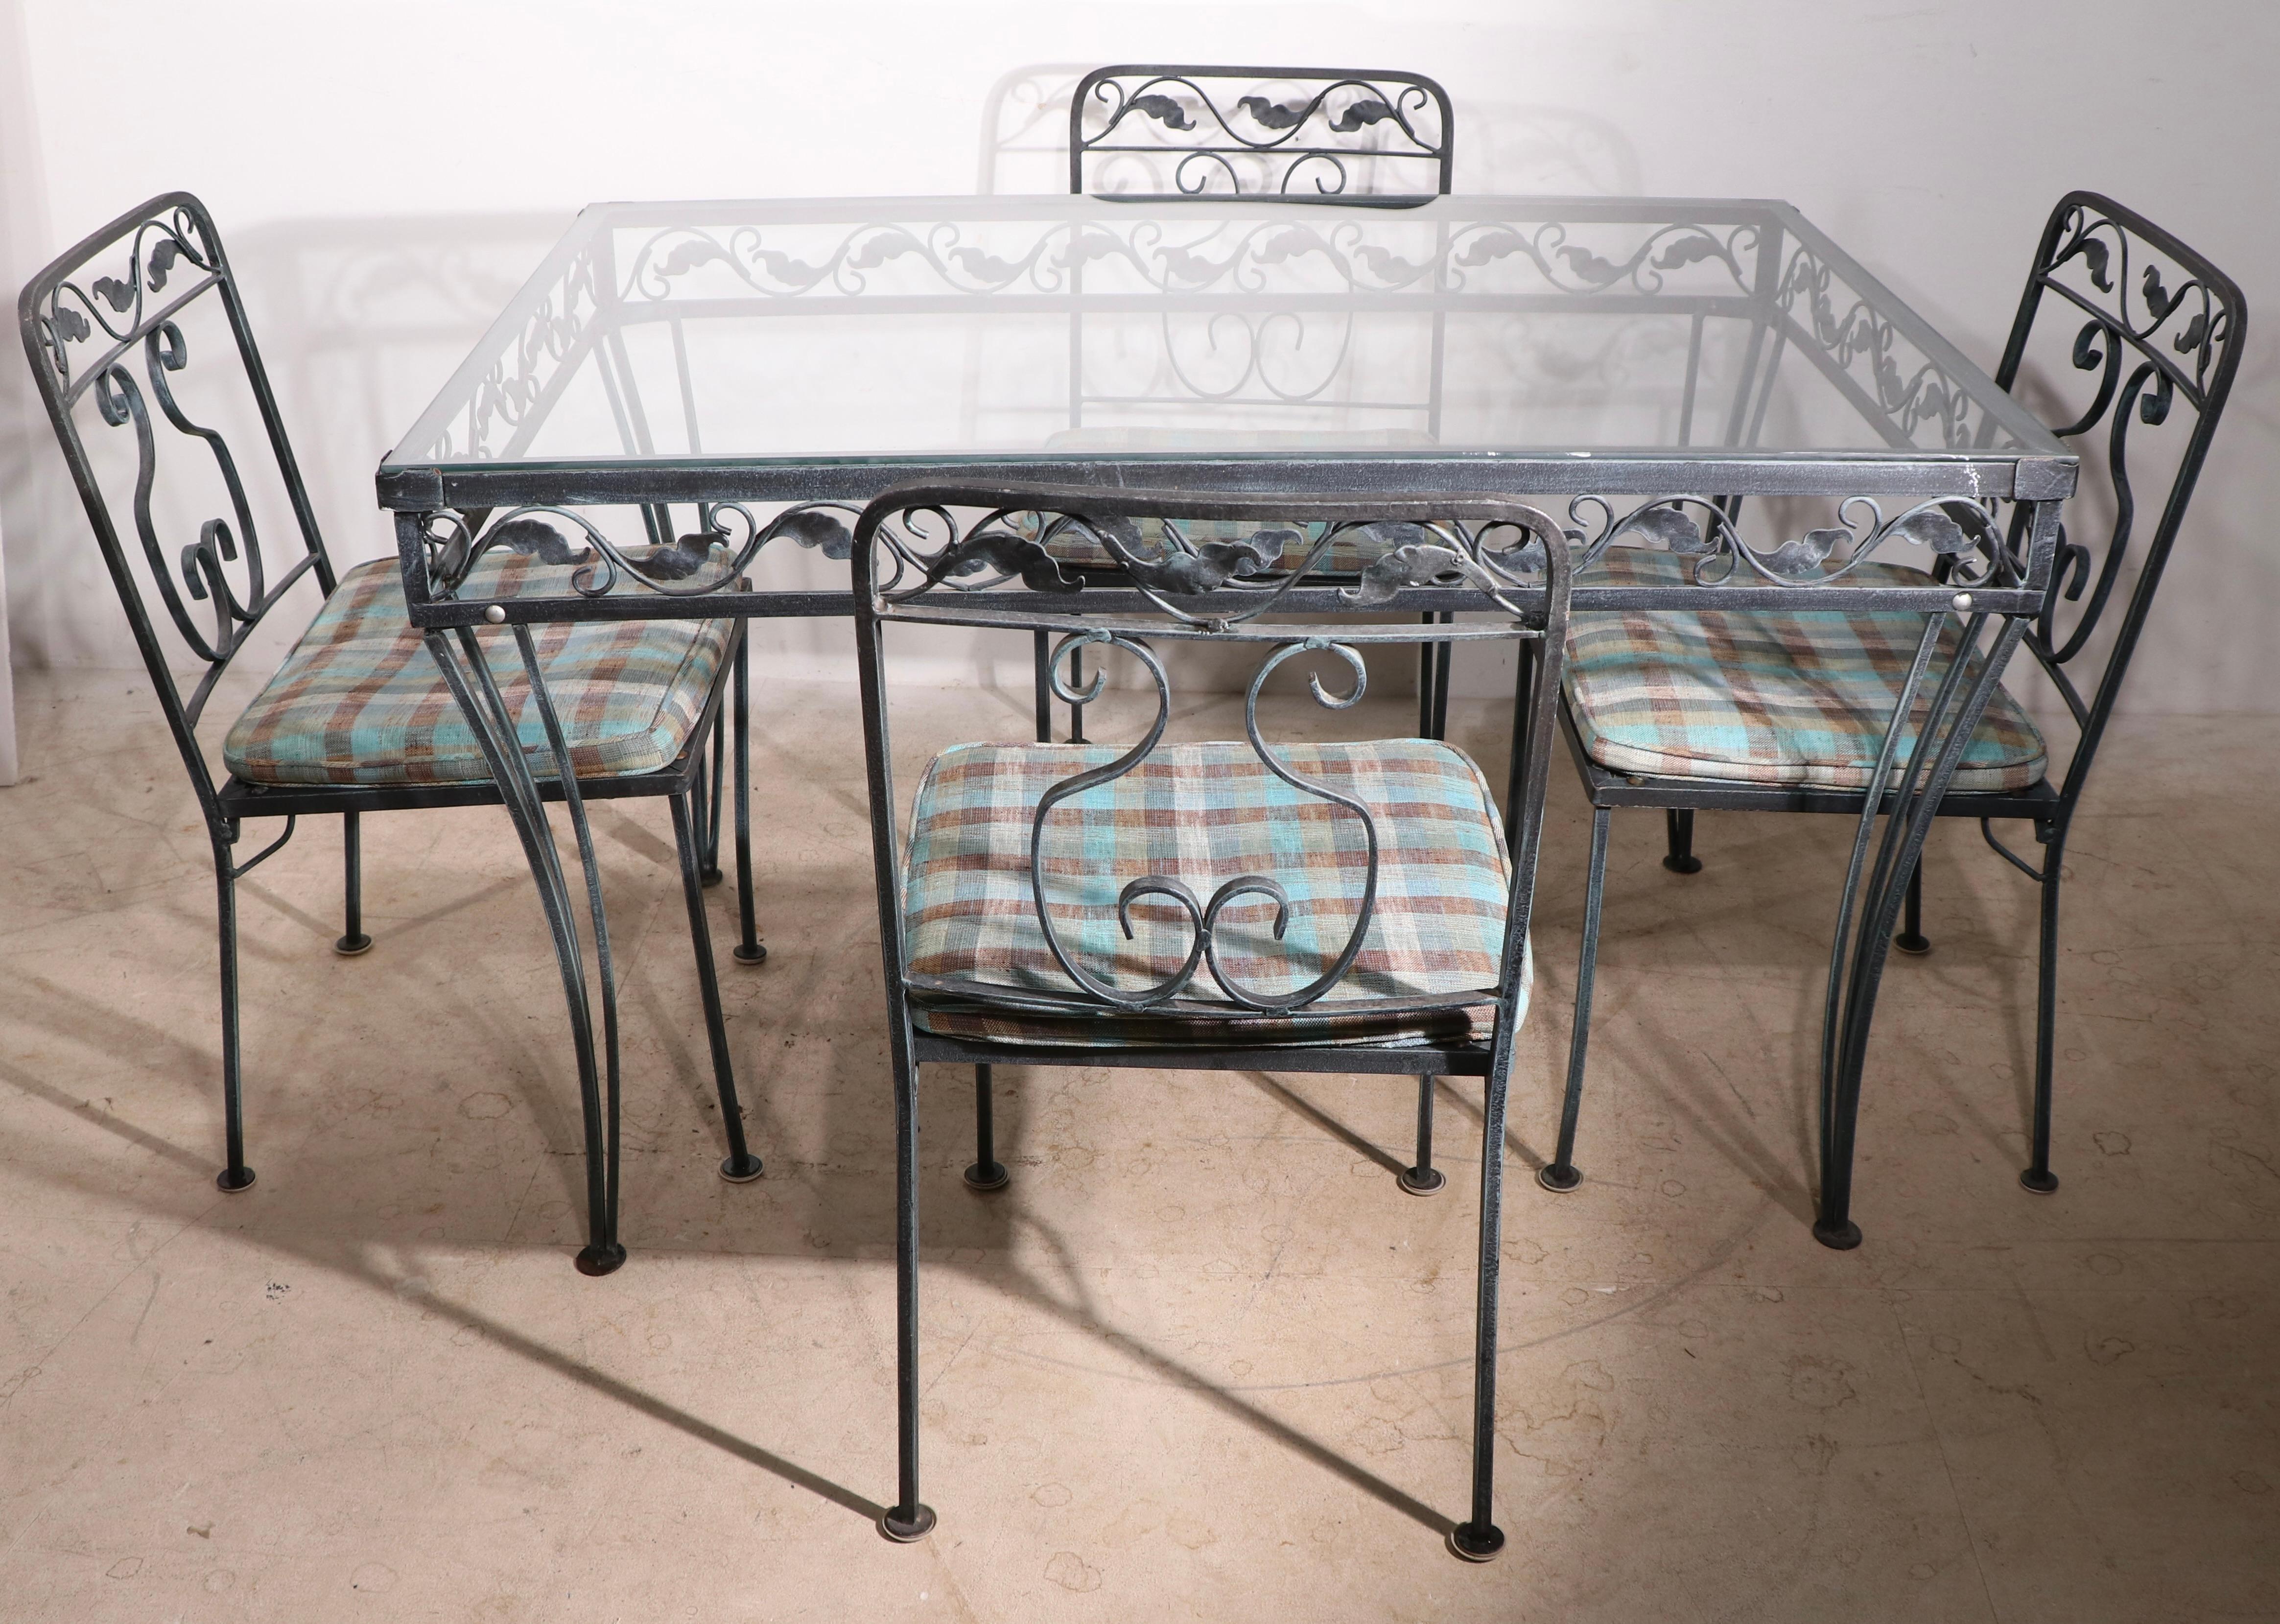 Chic garden, patio, dinette set consisting of a dining table , and four side chairs. The table has a tempered glass top, the chairs have their original upholstered pad seats, metal executed in faux Verdigris finish . Made by Medowcraft, in the style